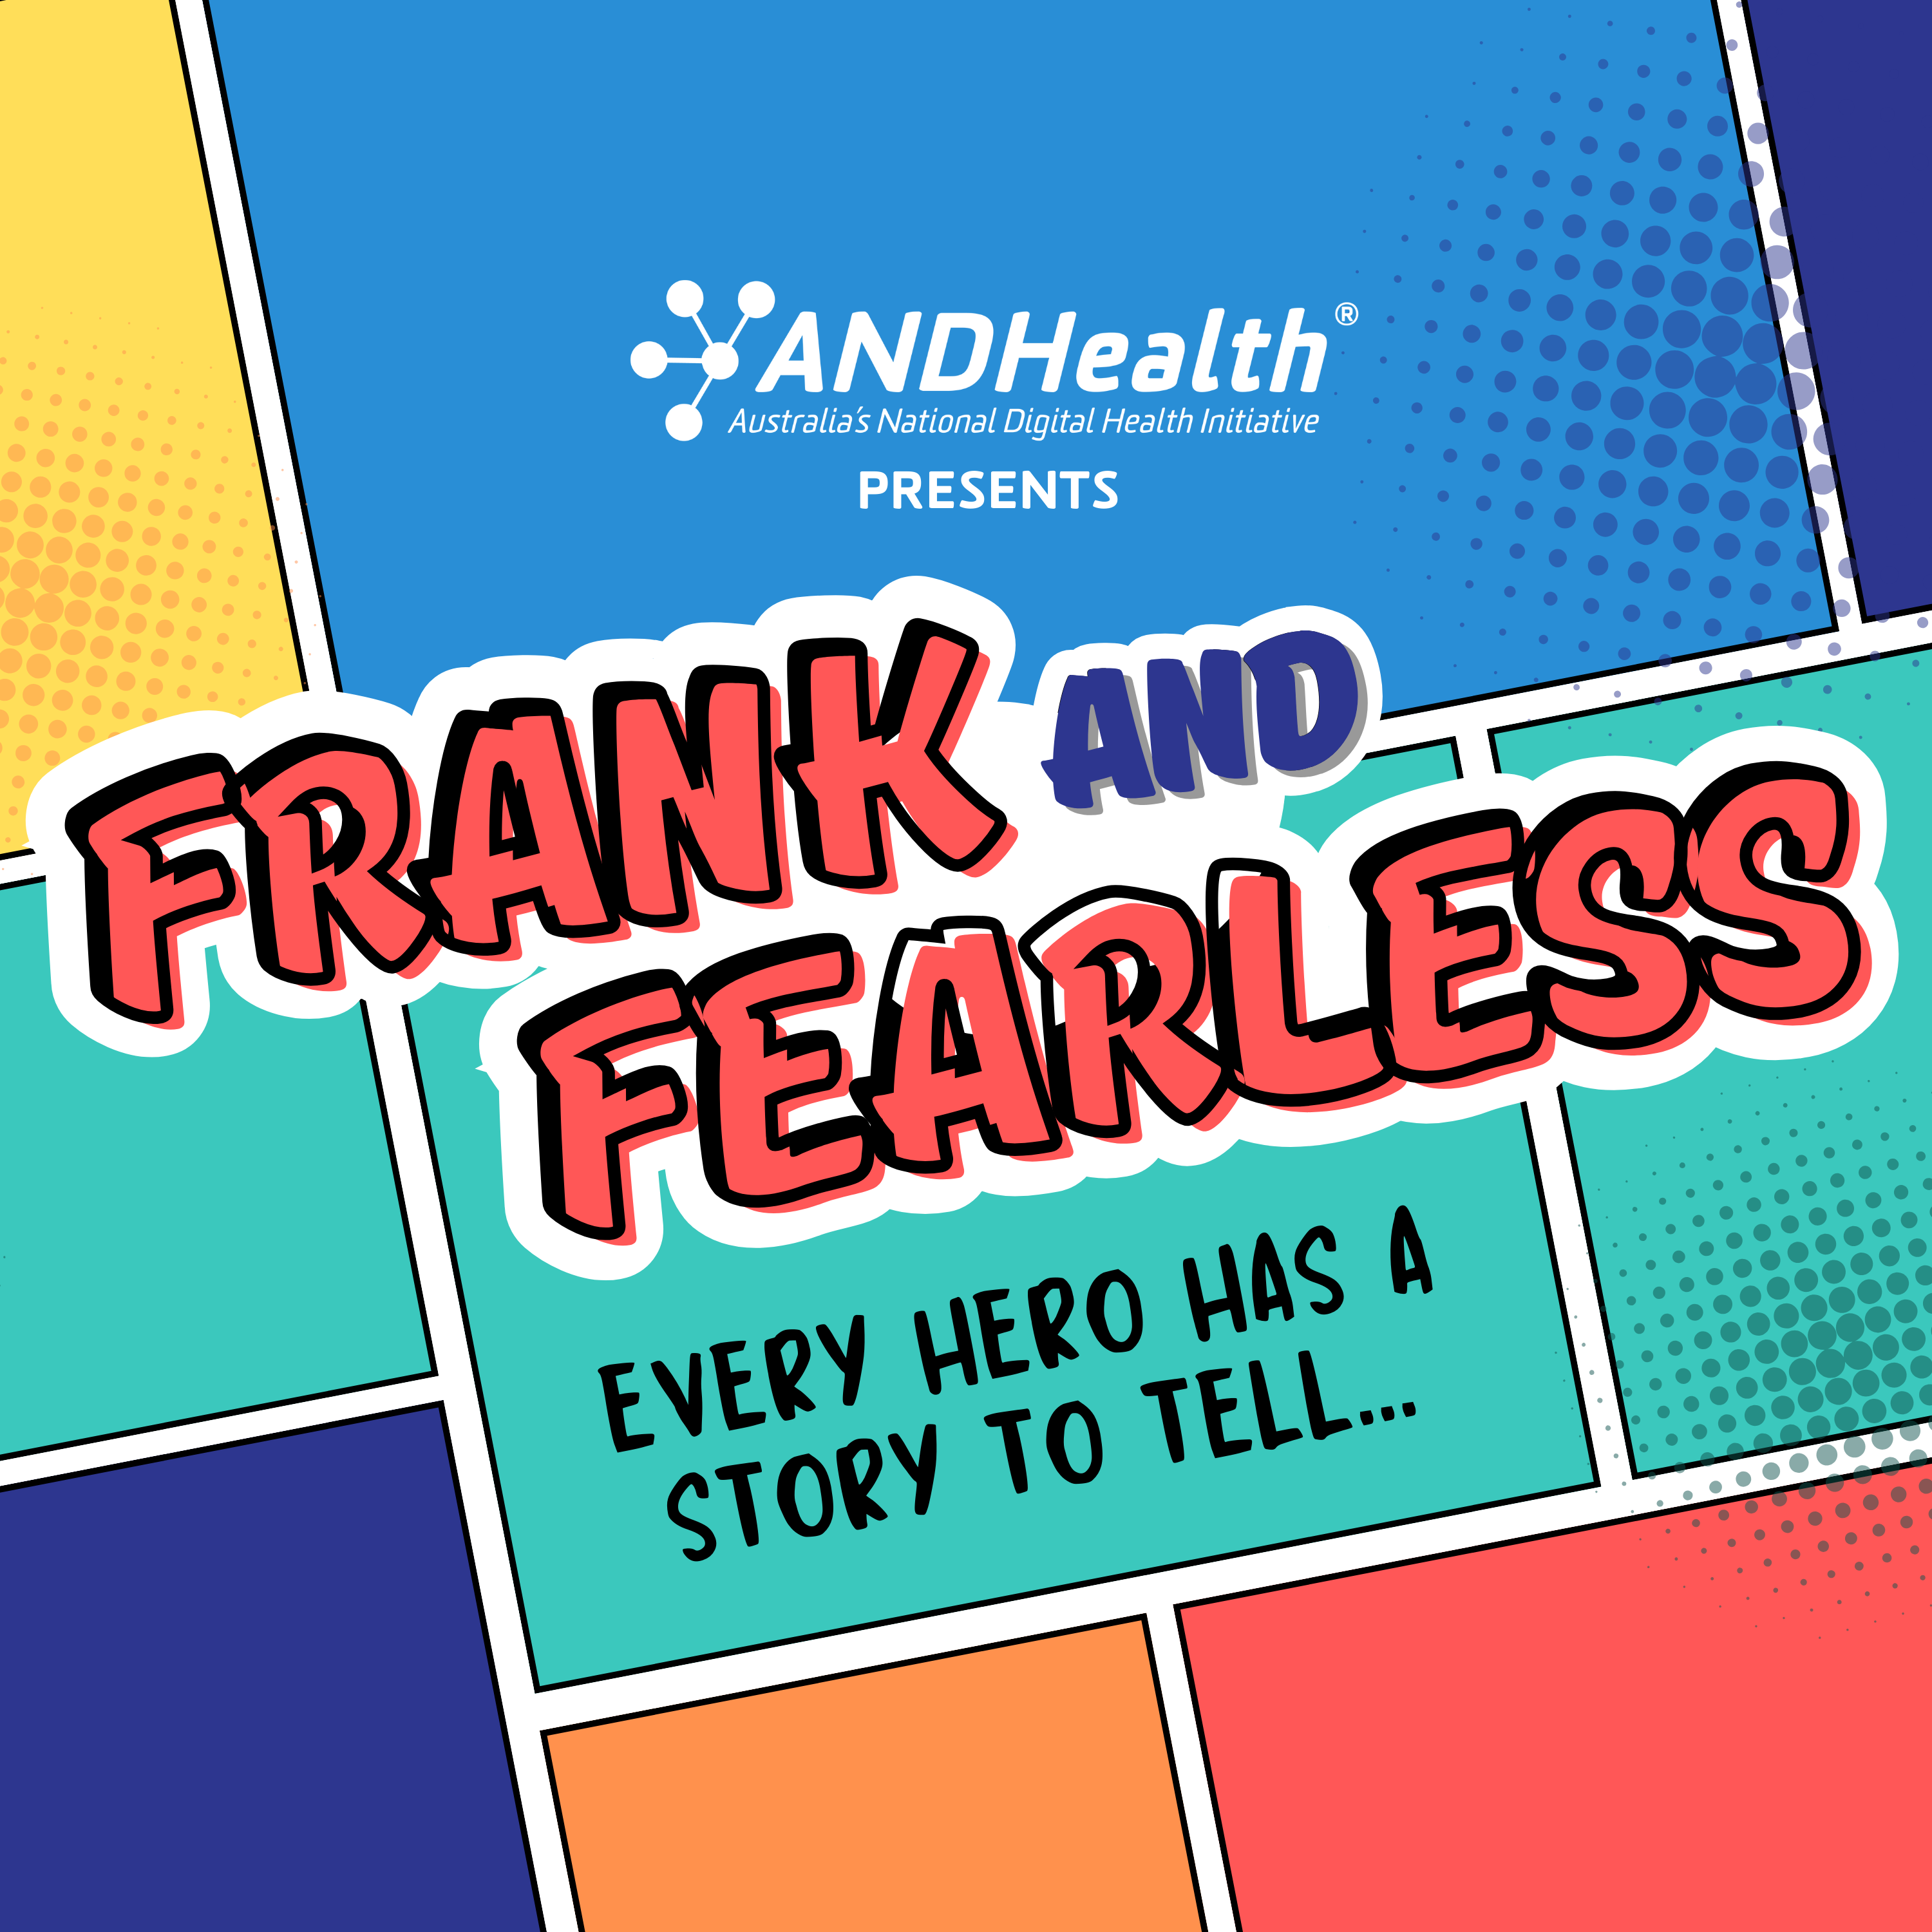 Artwork for Frank and Fearless by ANDHealth